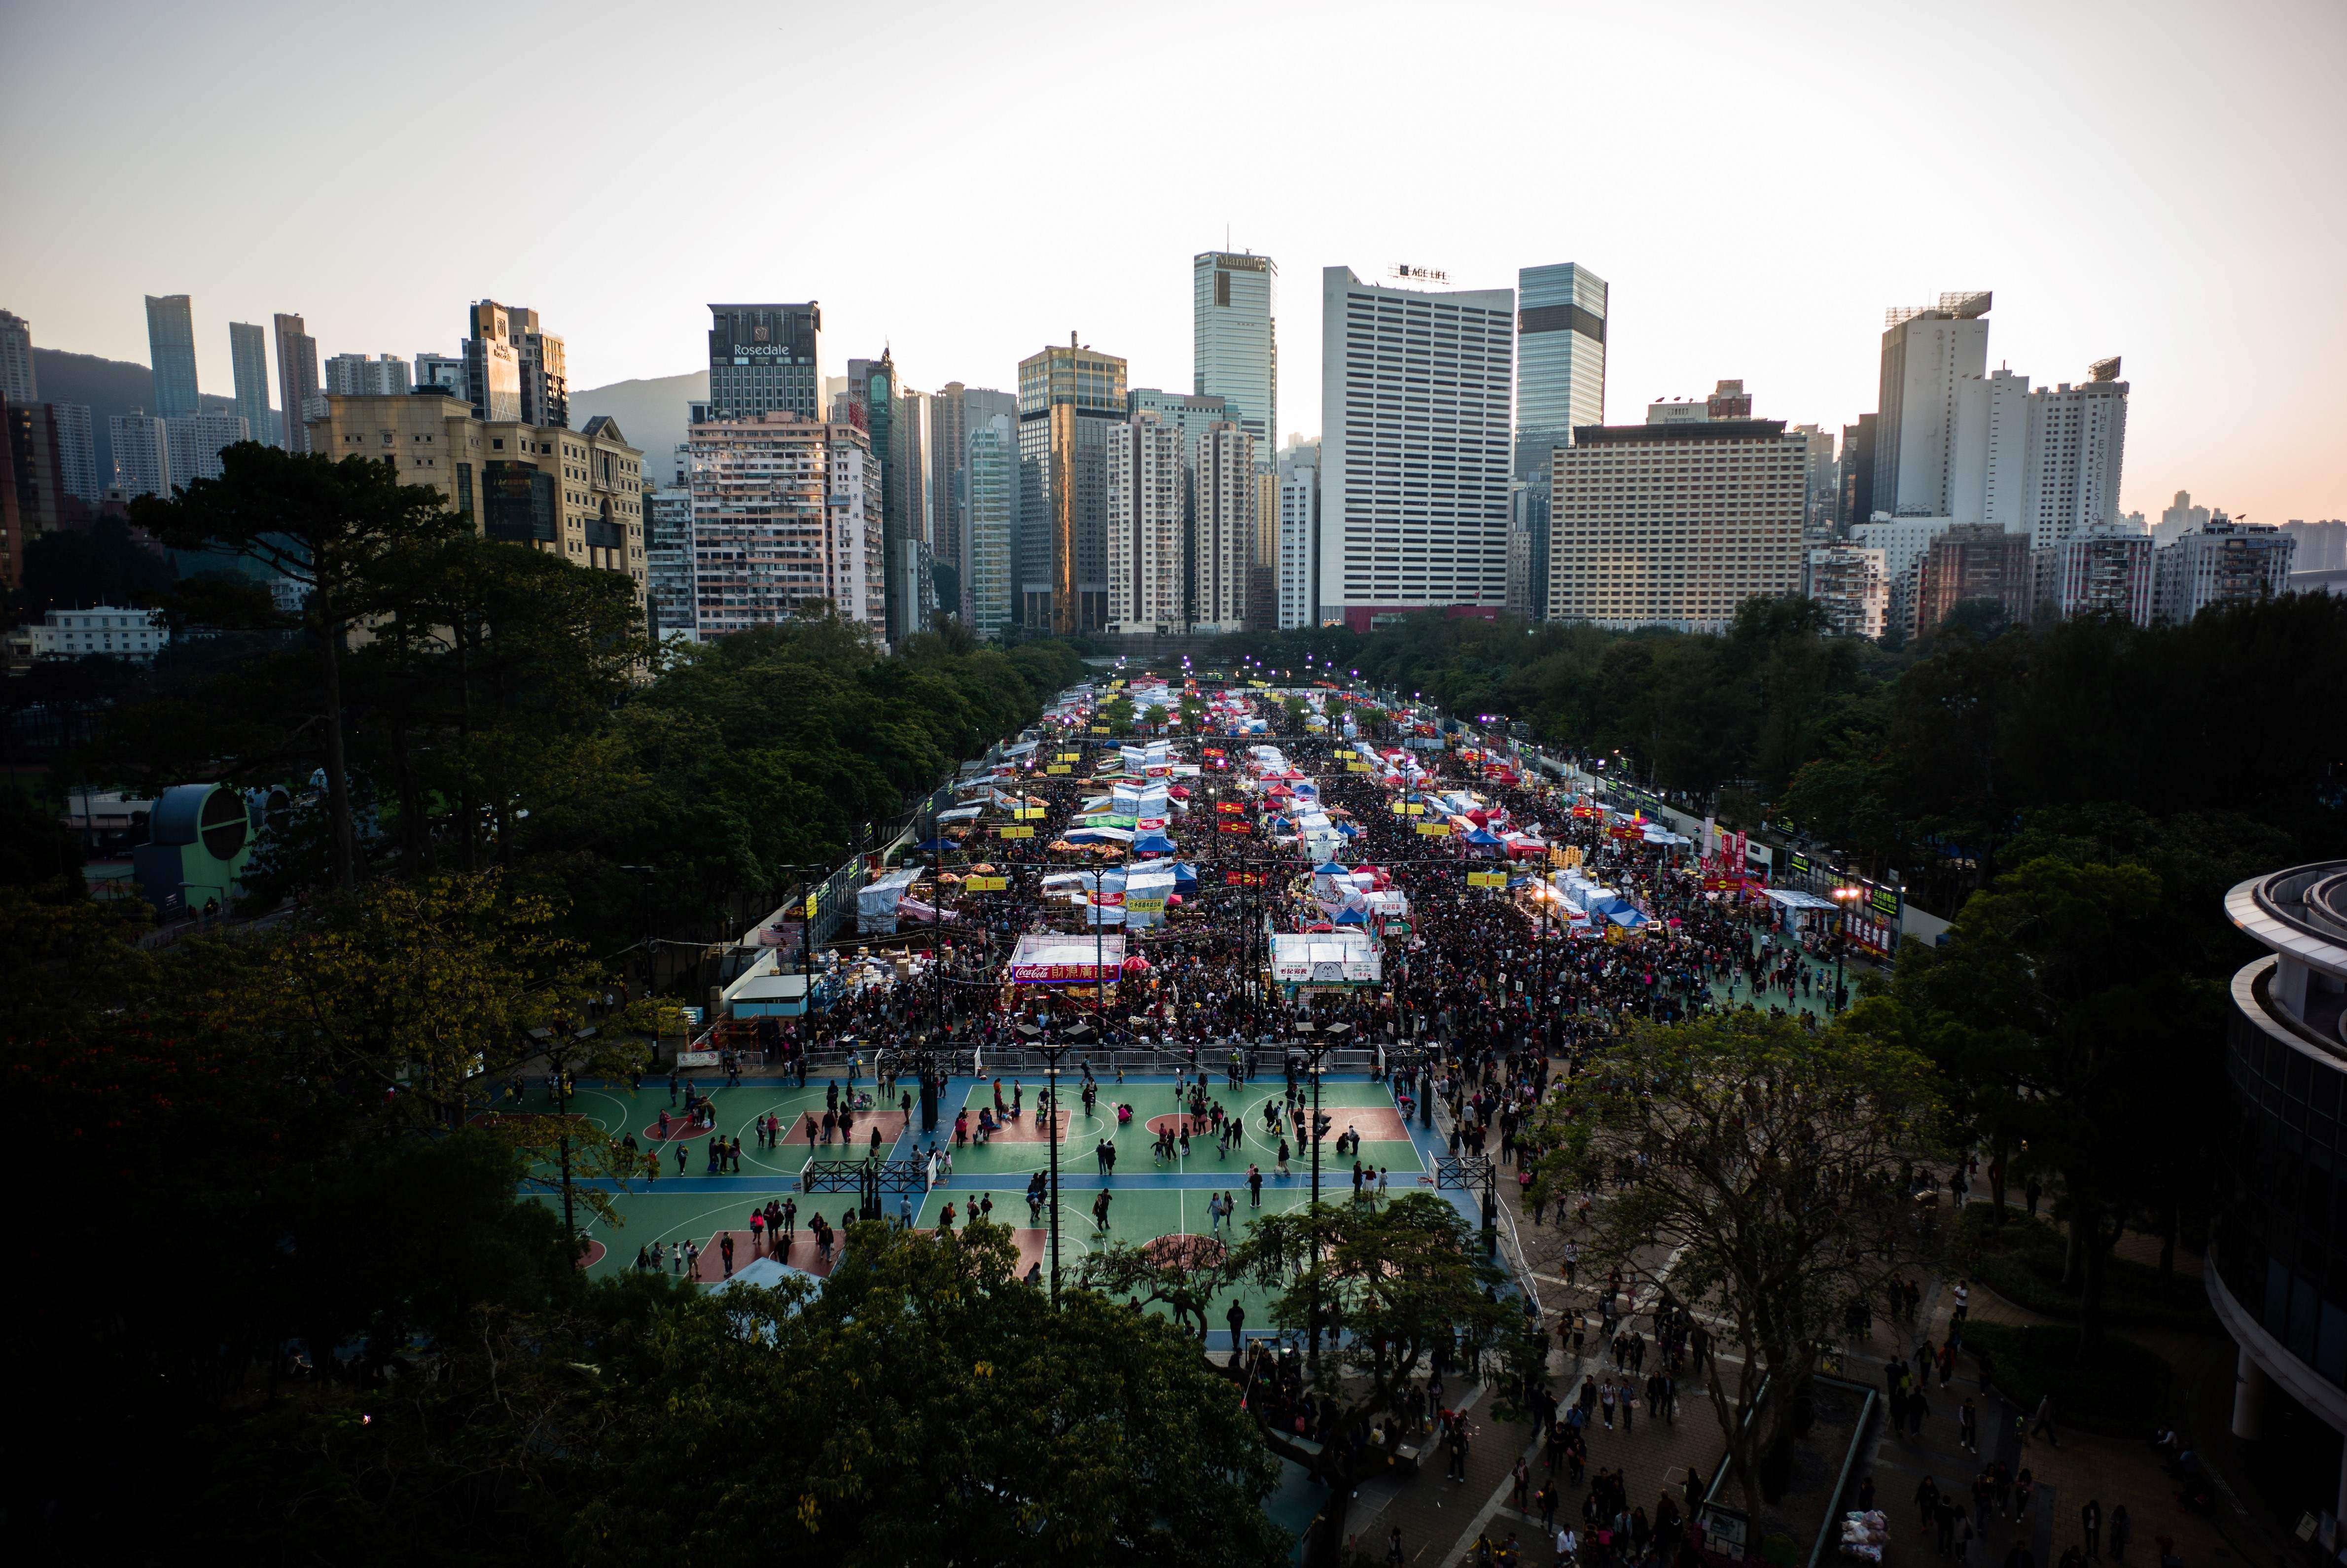 Crowds throng the New Year Flower Market in Victoria Park on January 27, the eve of the Lunar New Year holiday. Victoria Park is among prominent public open spaces around Hong Kong identified as having the potential for underground development. Photo: AFP